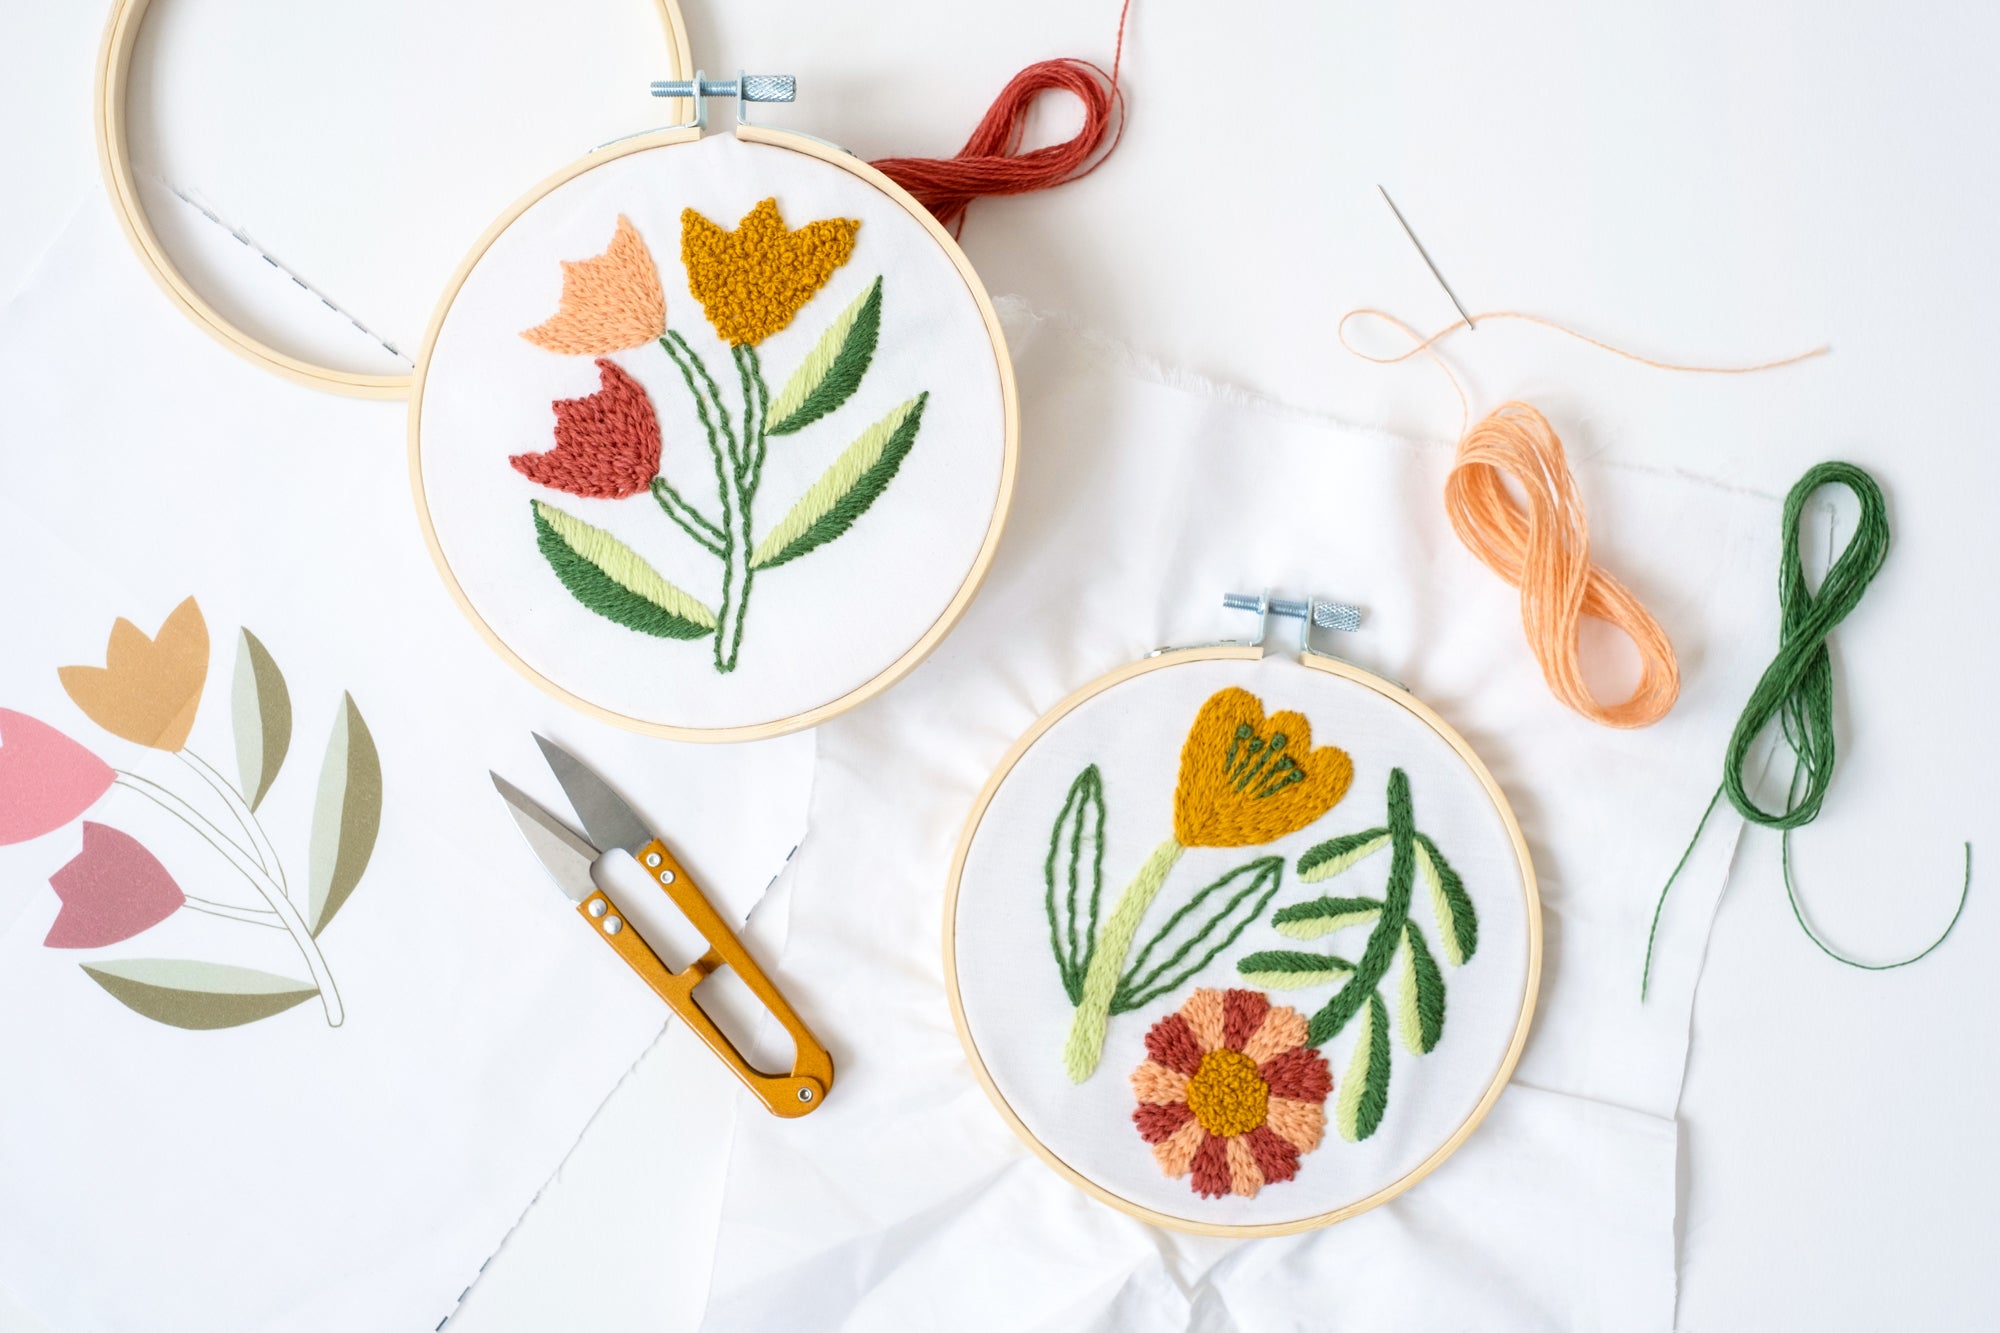 Embroidery projects and materials